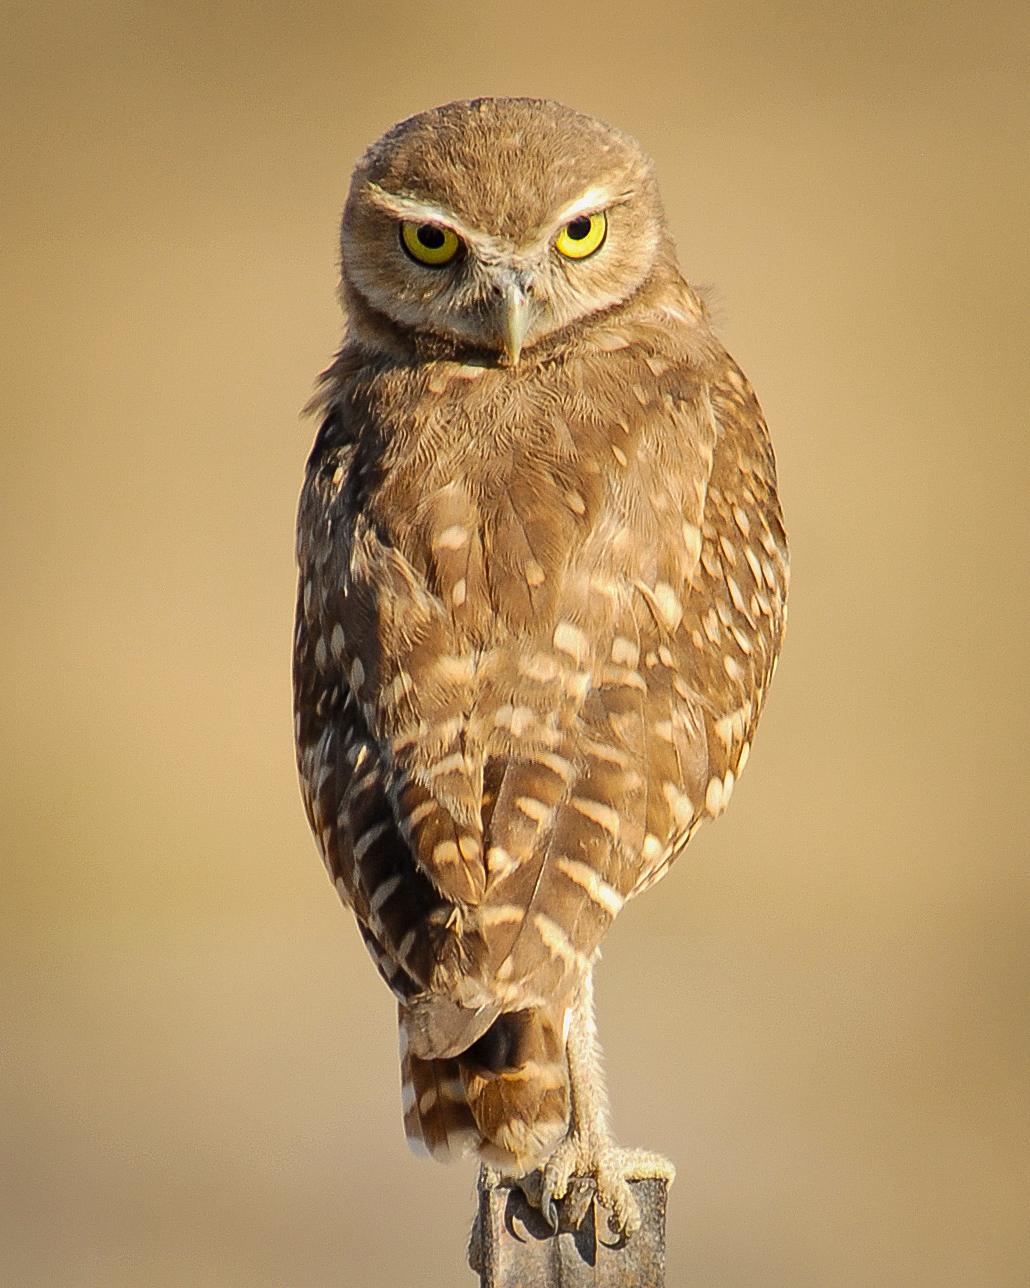 Burrowing Owl Photo by Mike Fish